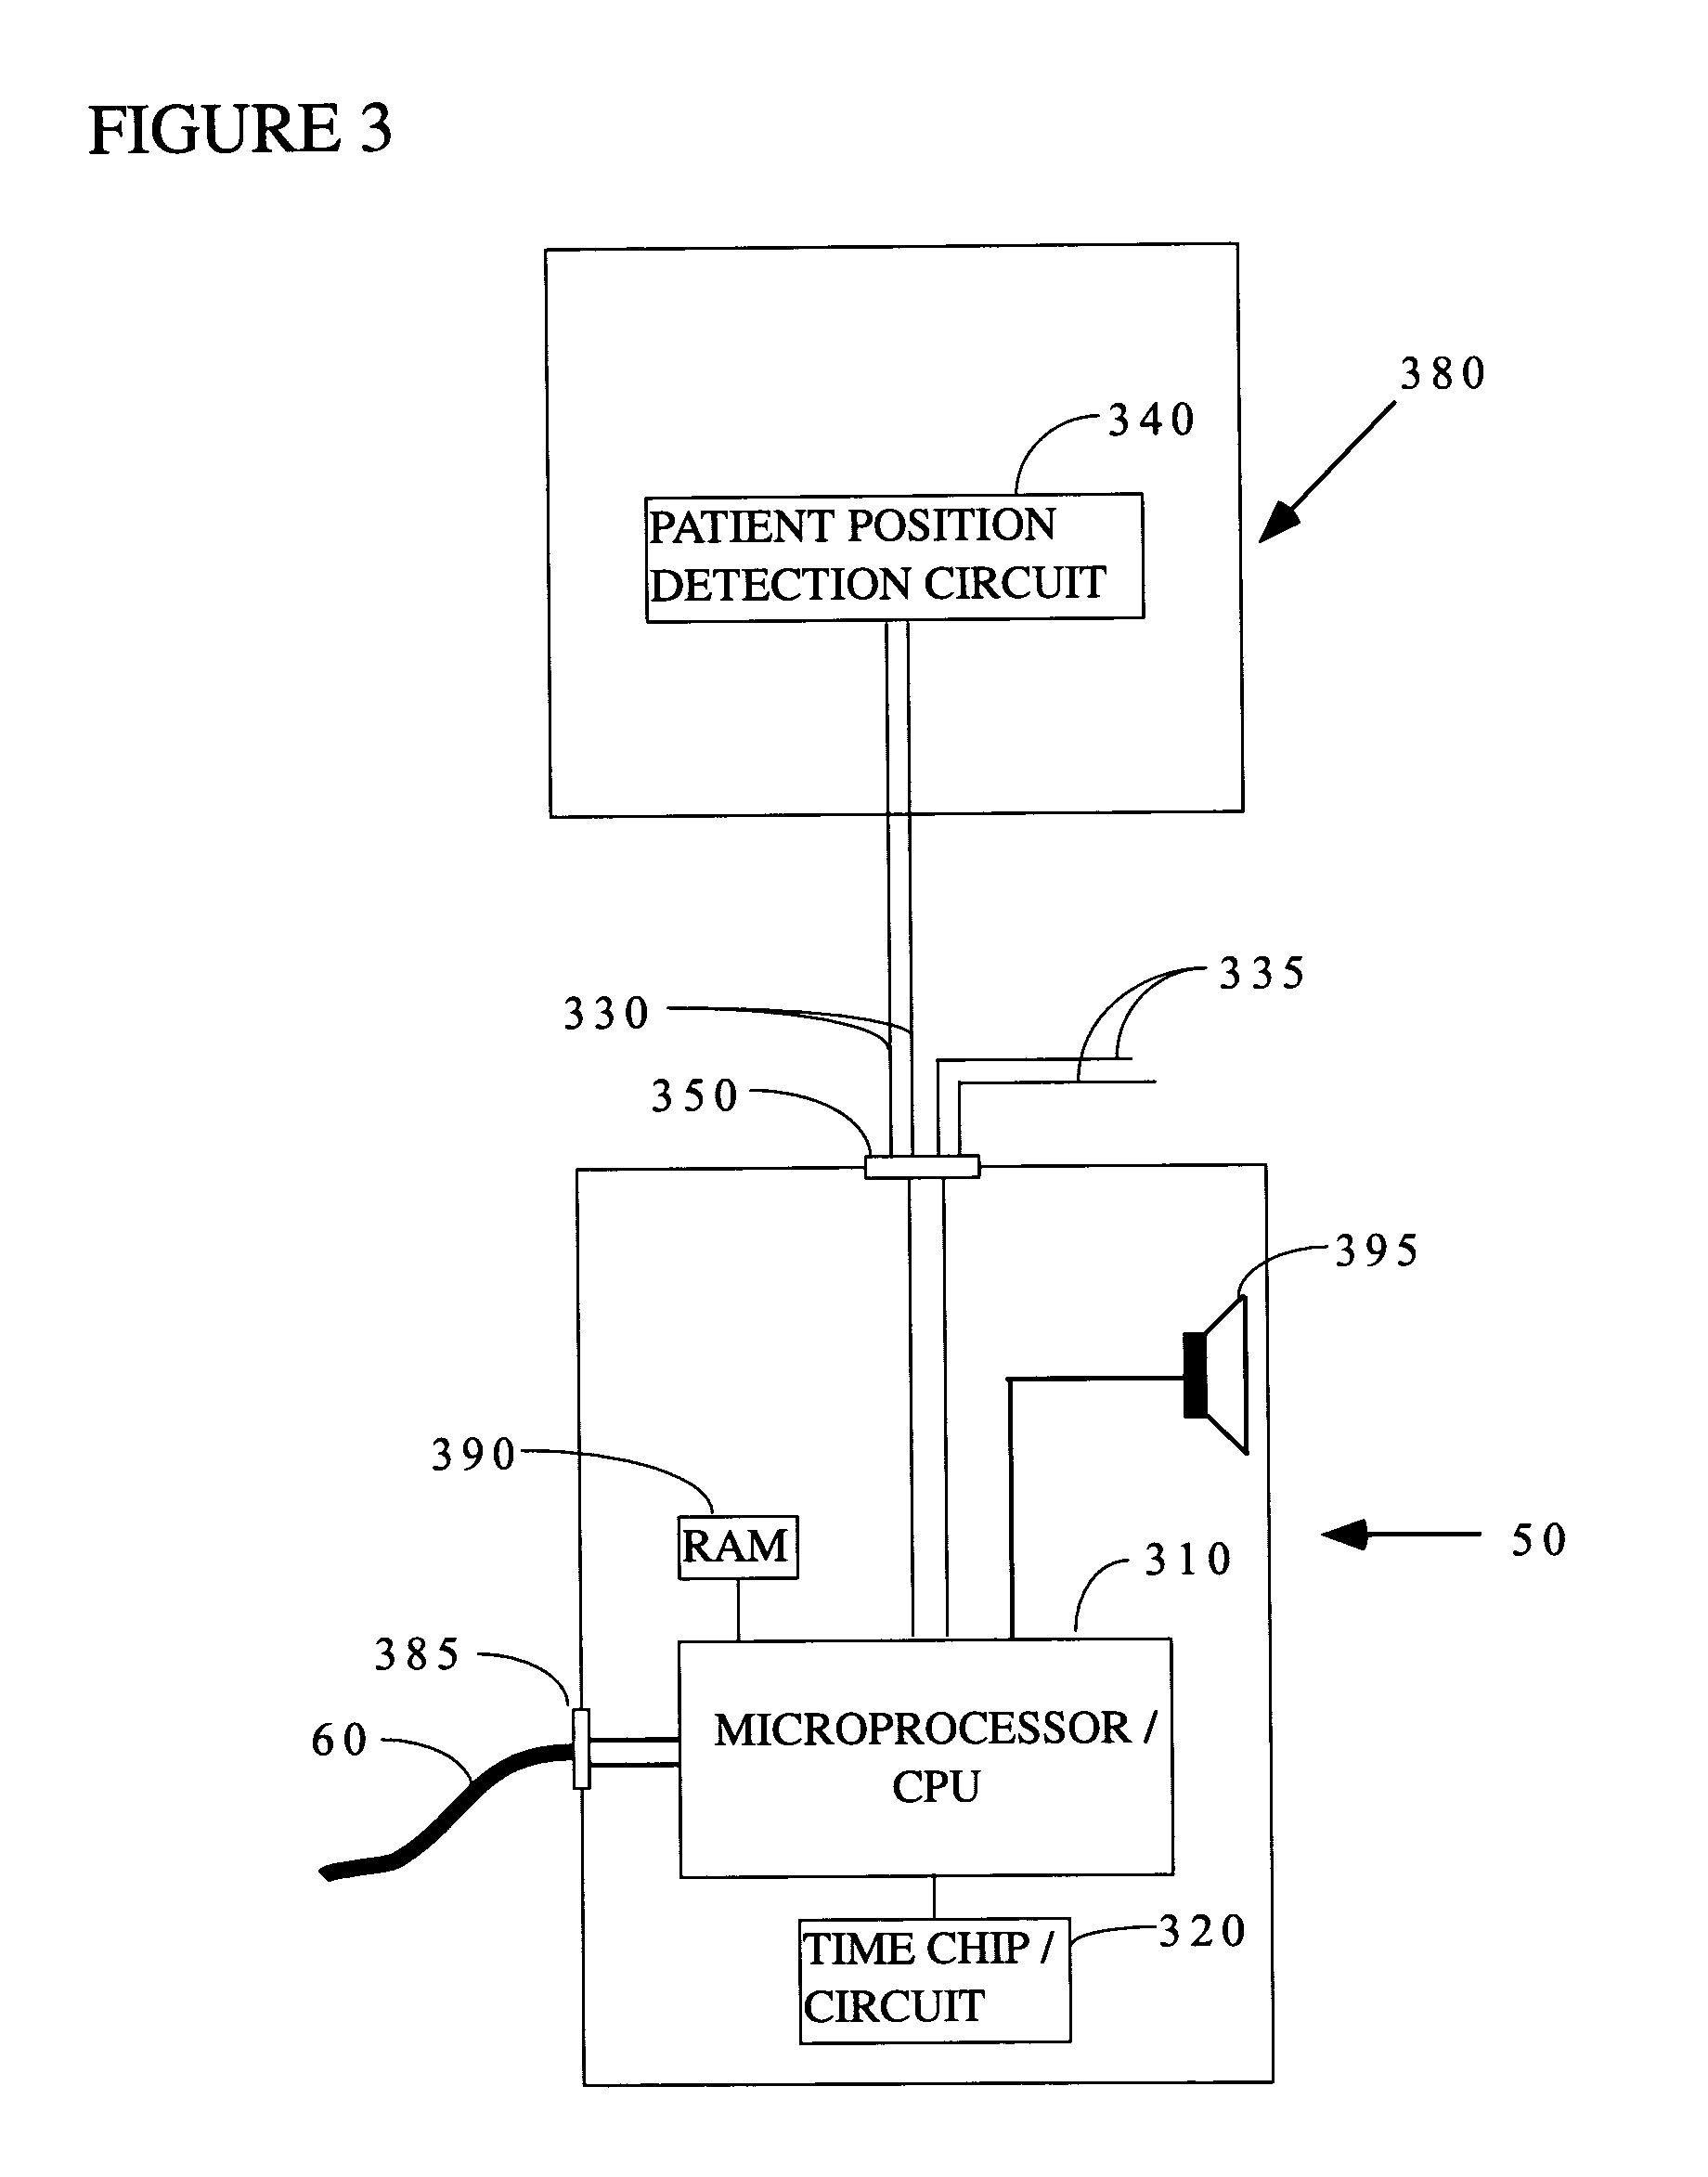 Apparatus and method for reducing the risk of decubitus ulcers